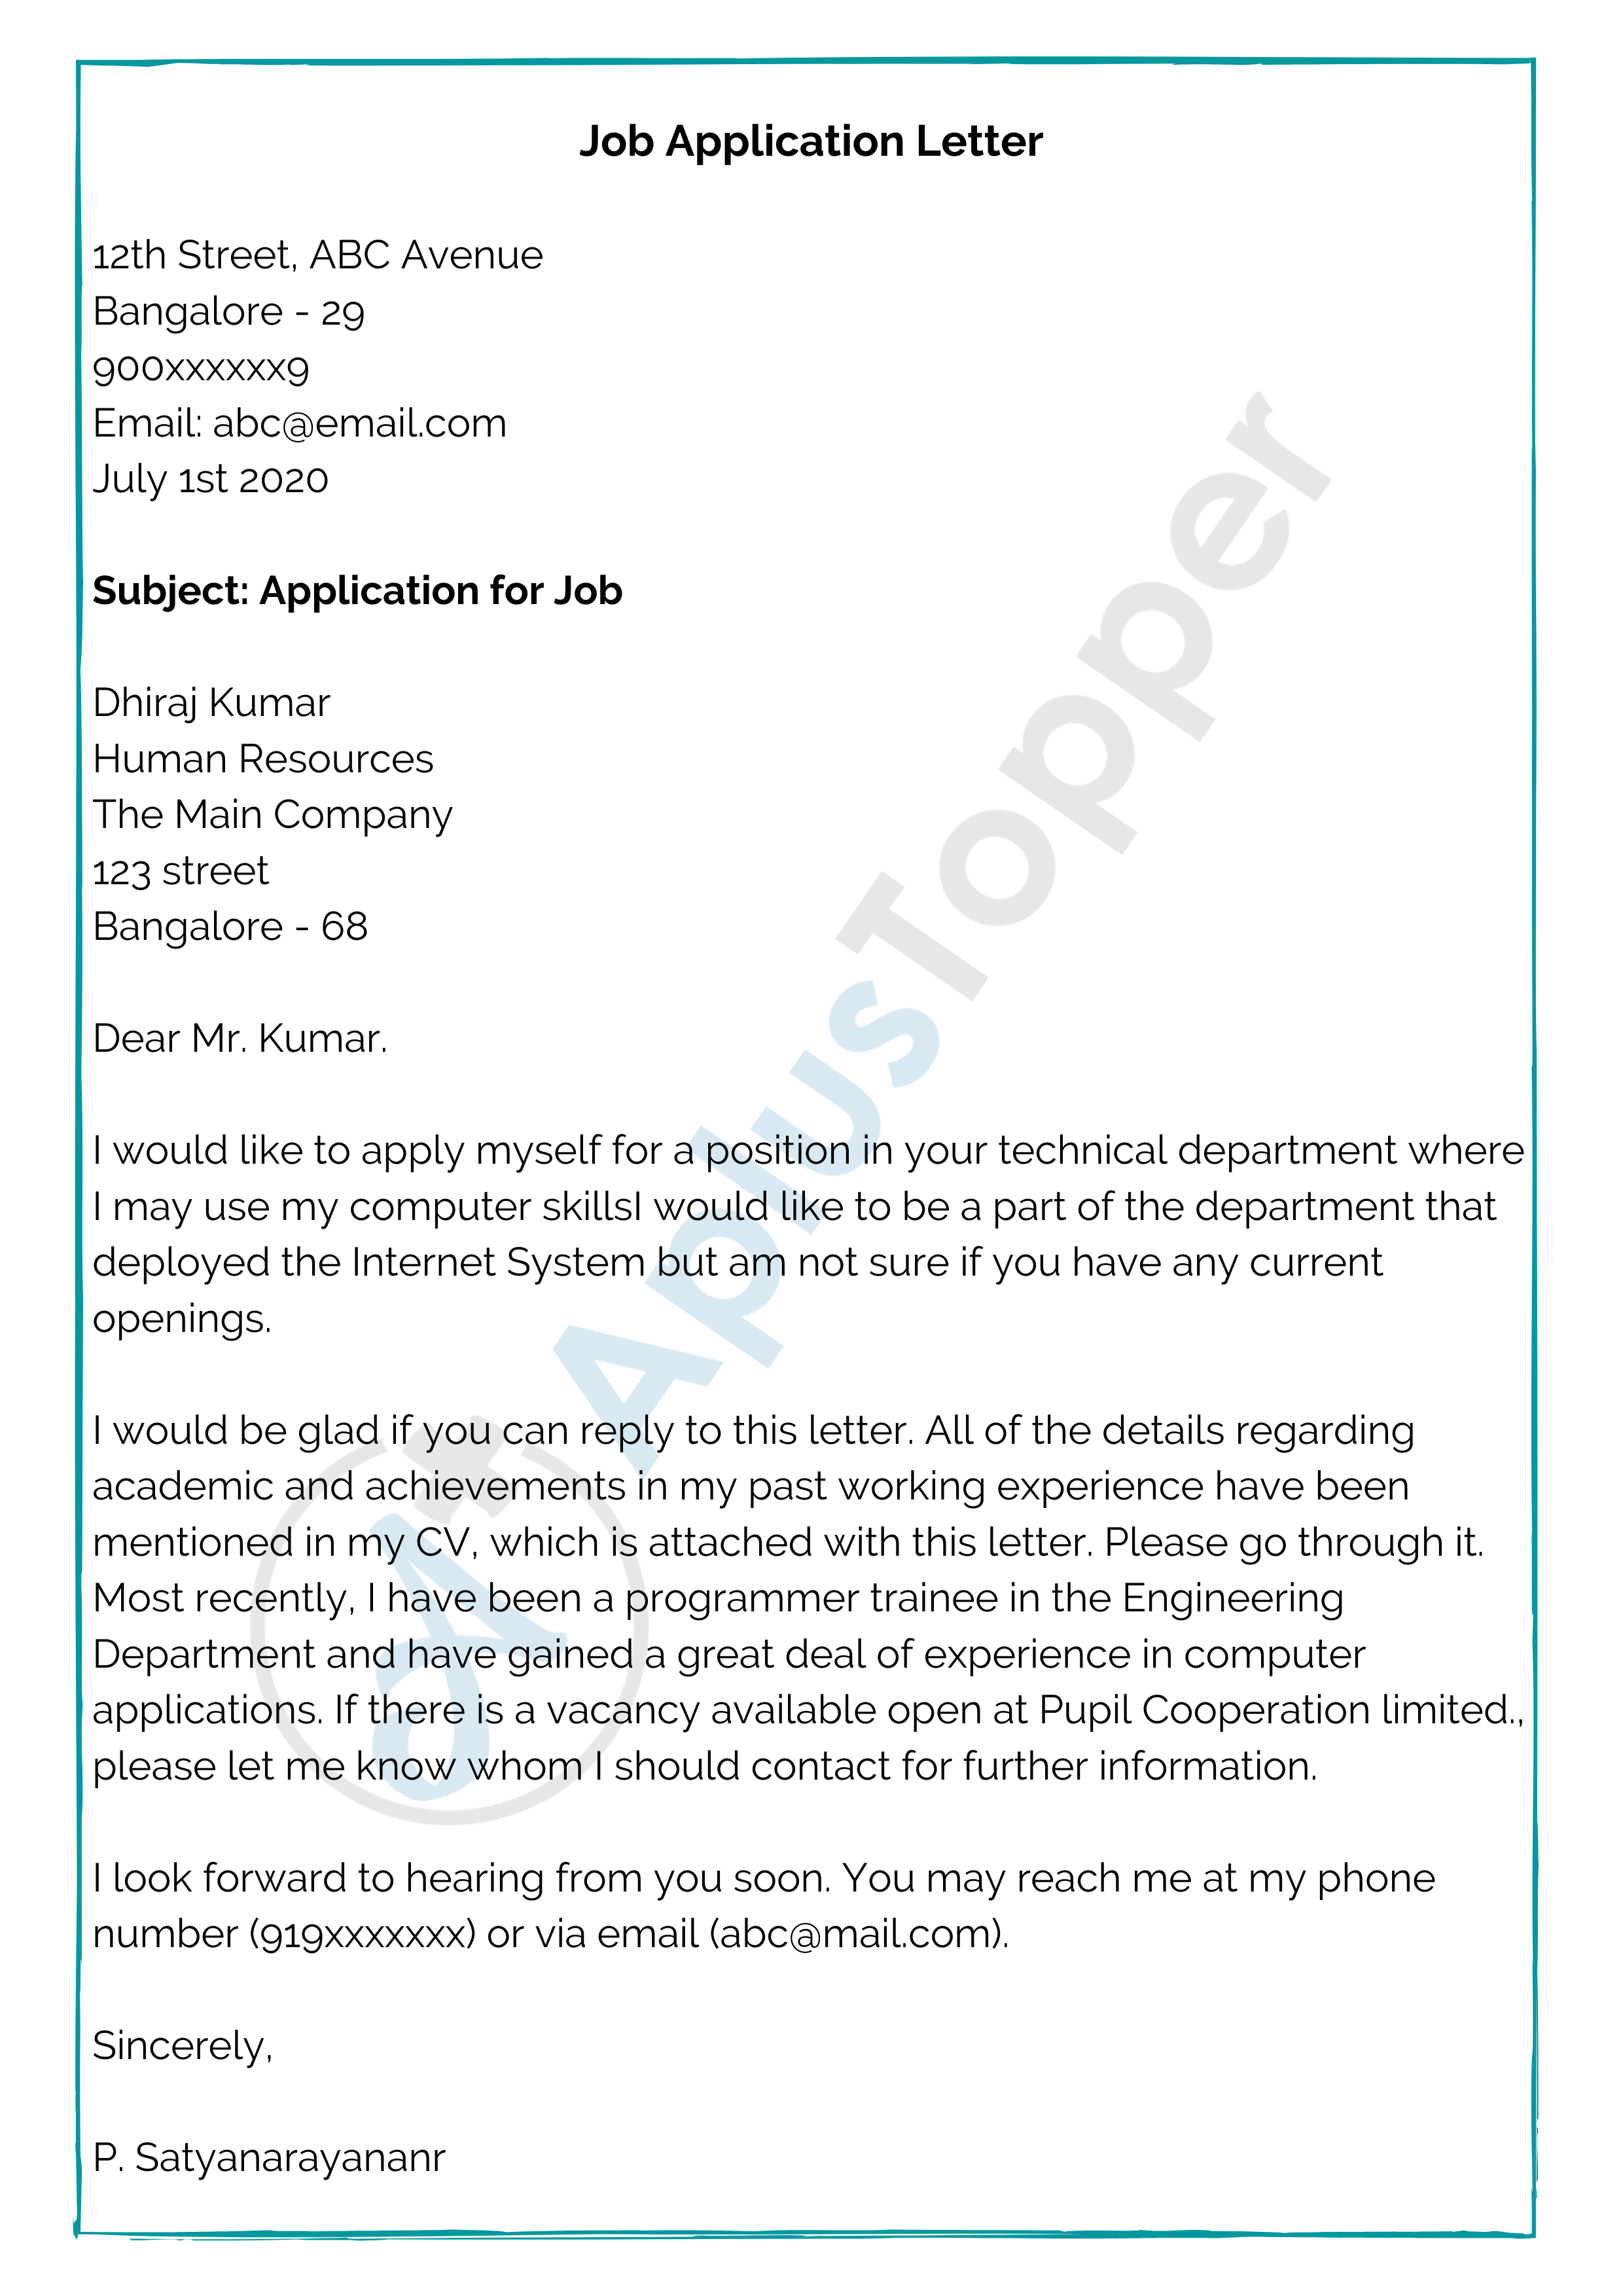 Business Letter | Format, Samples, How To Write Business ...